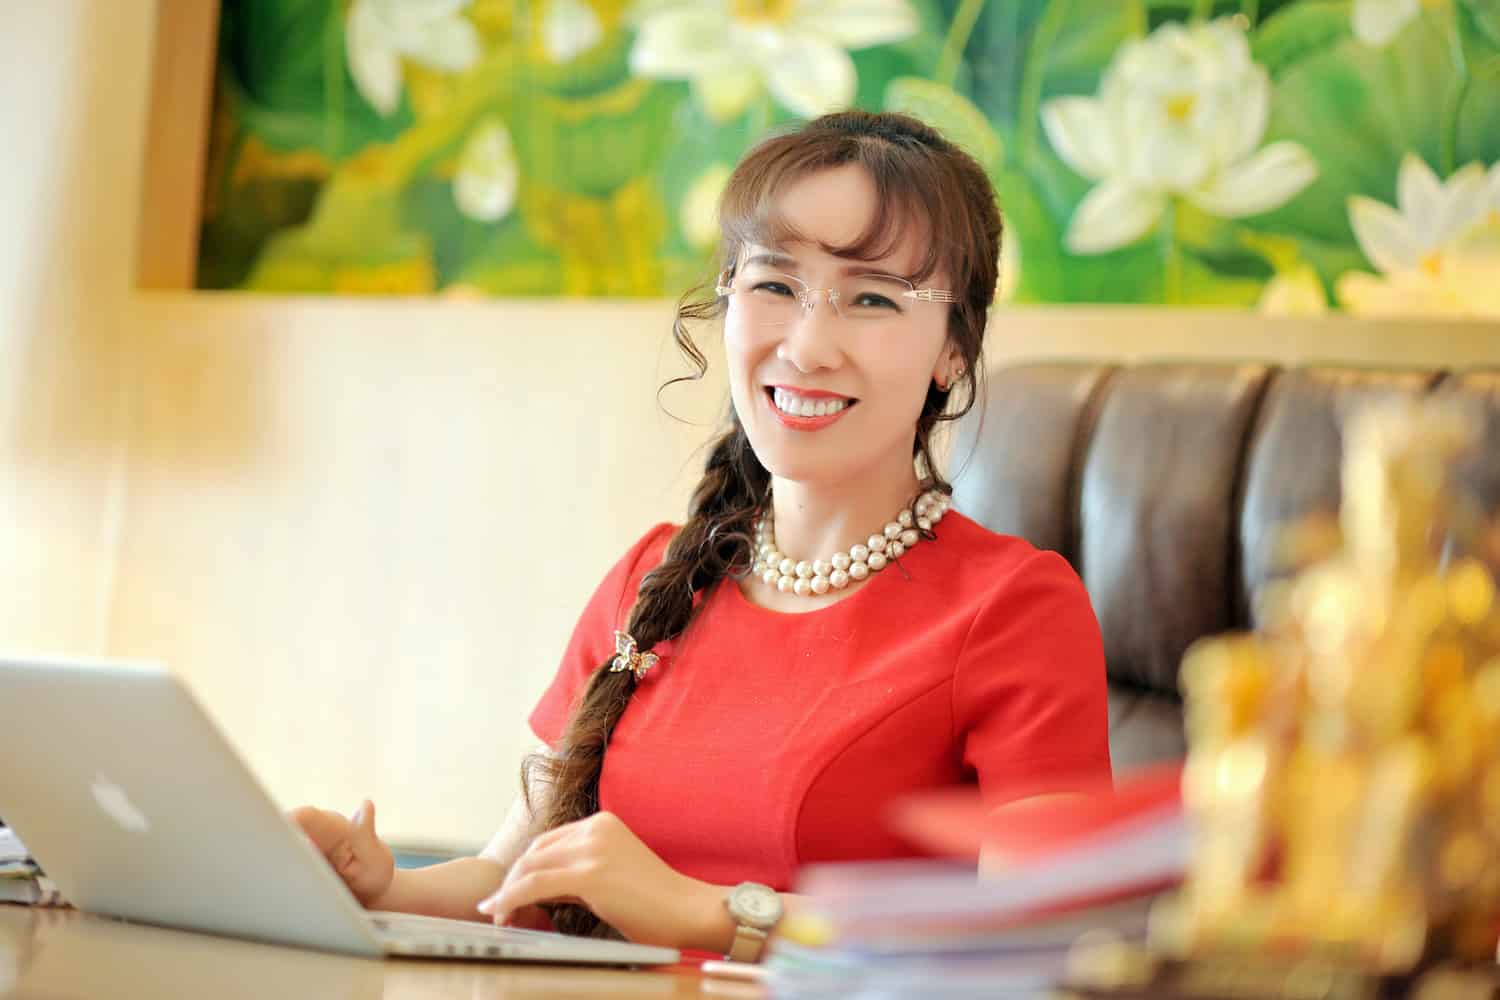 Vietjet chief executive honoured by Forbes